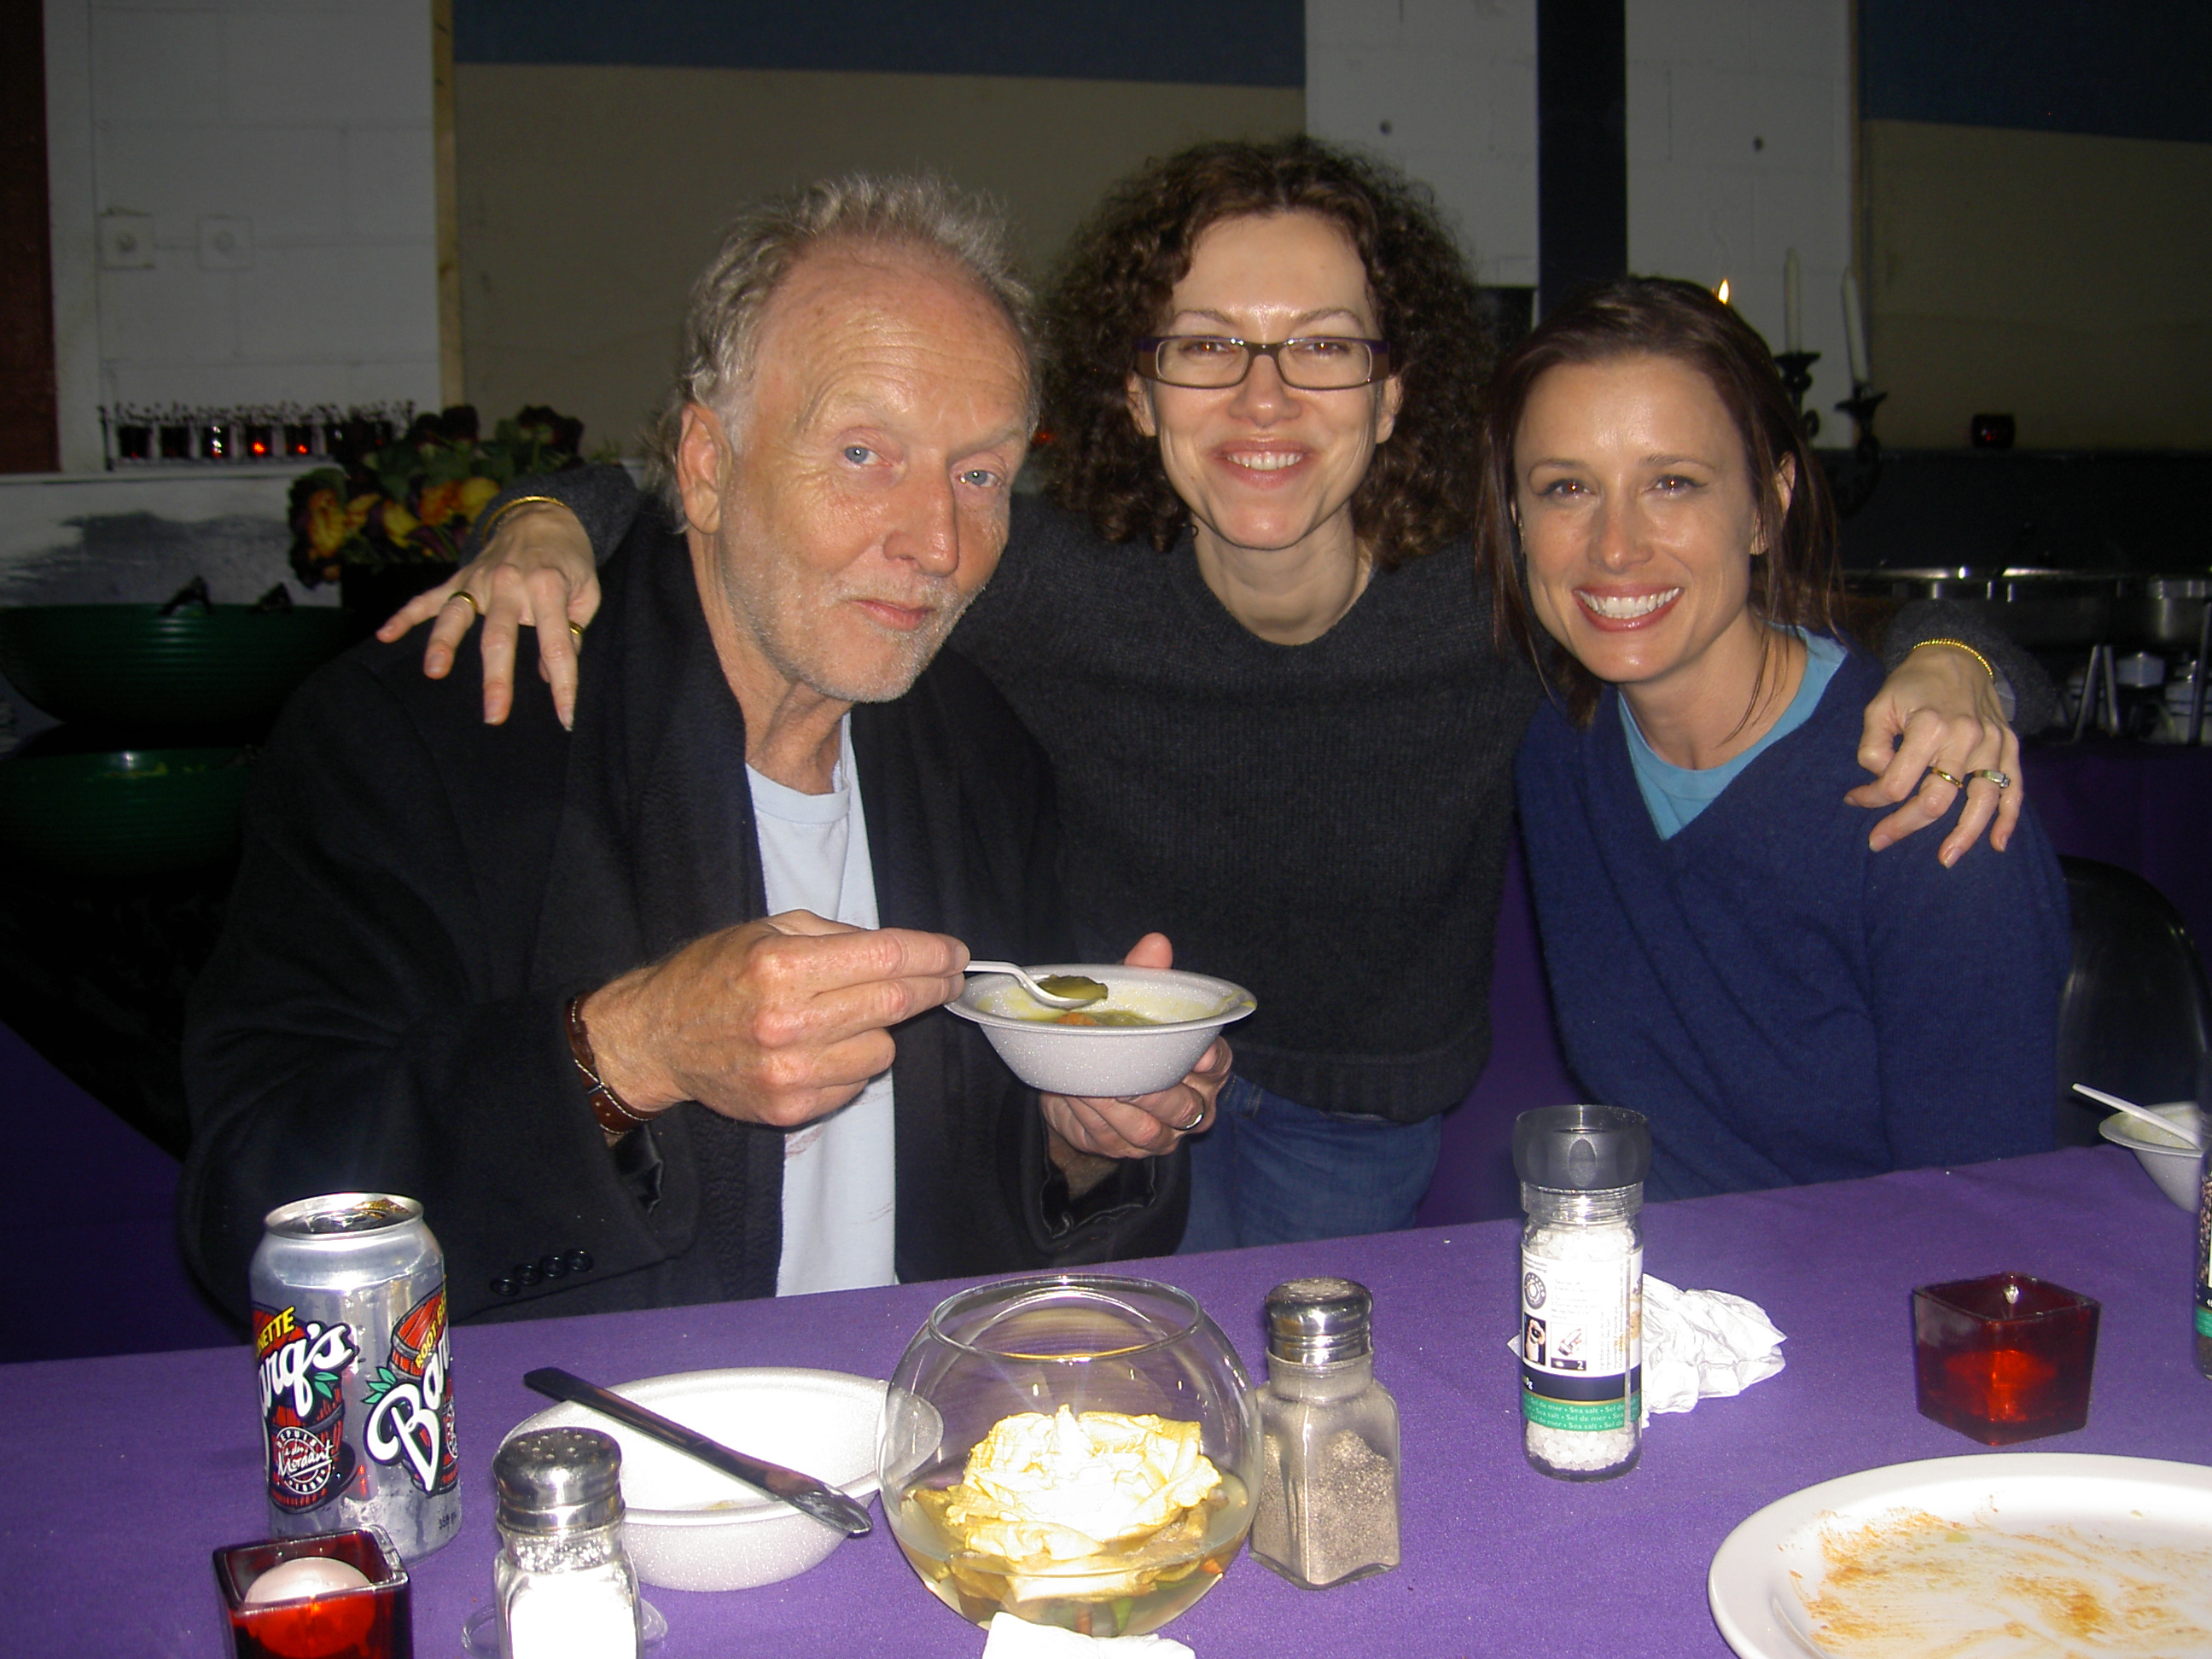 Tobin Bell, Elizabeth Rowin and Shawnee Smith on the set of SAW VI.